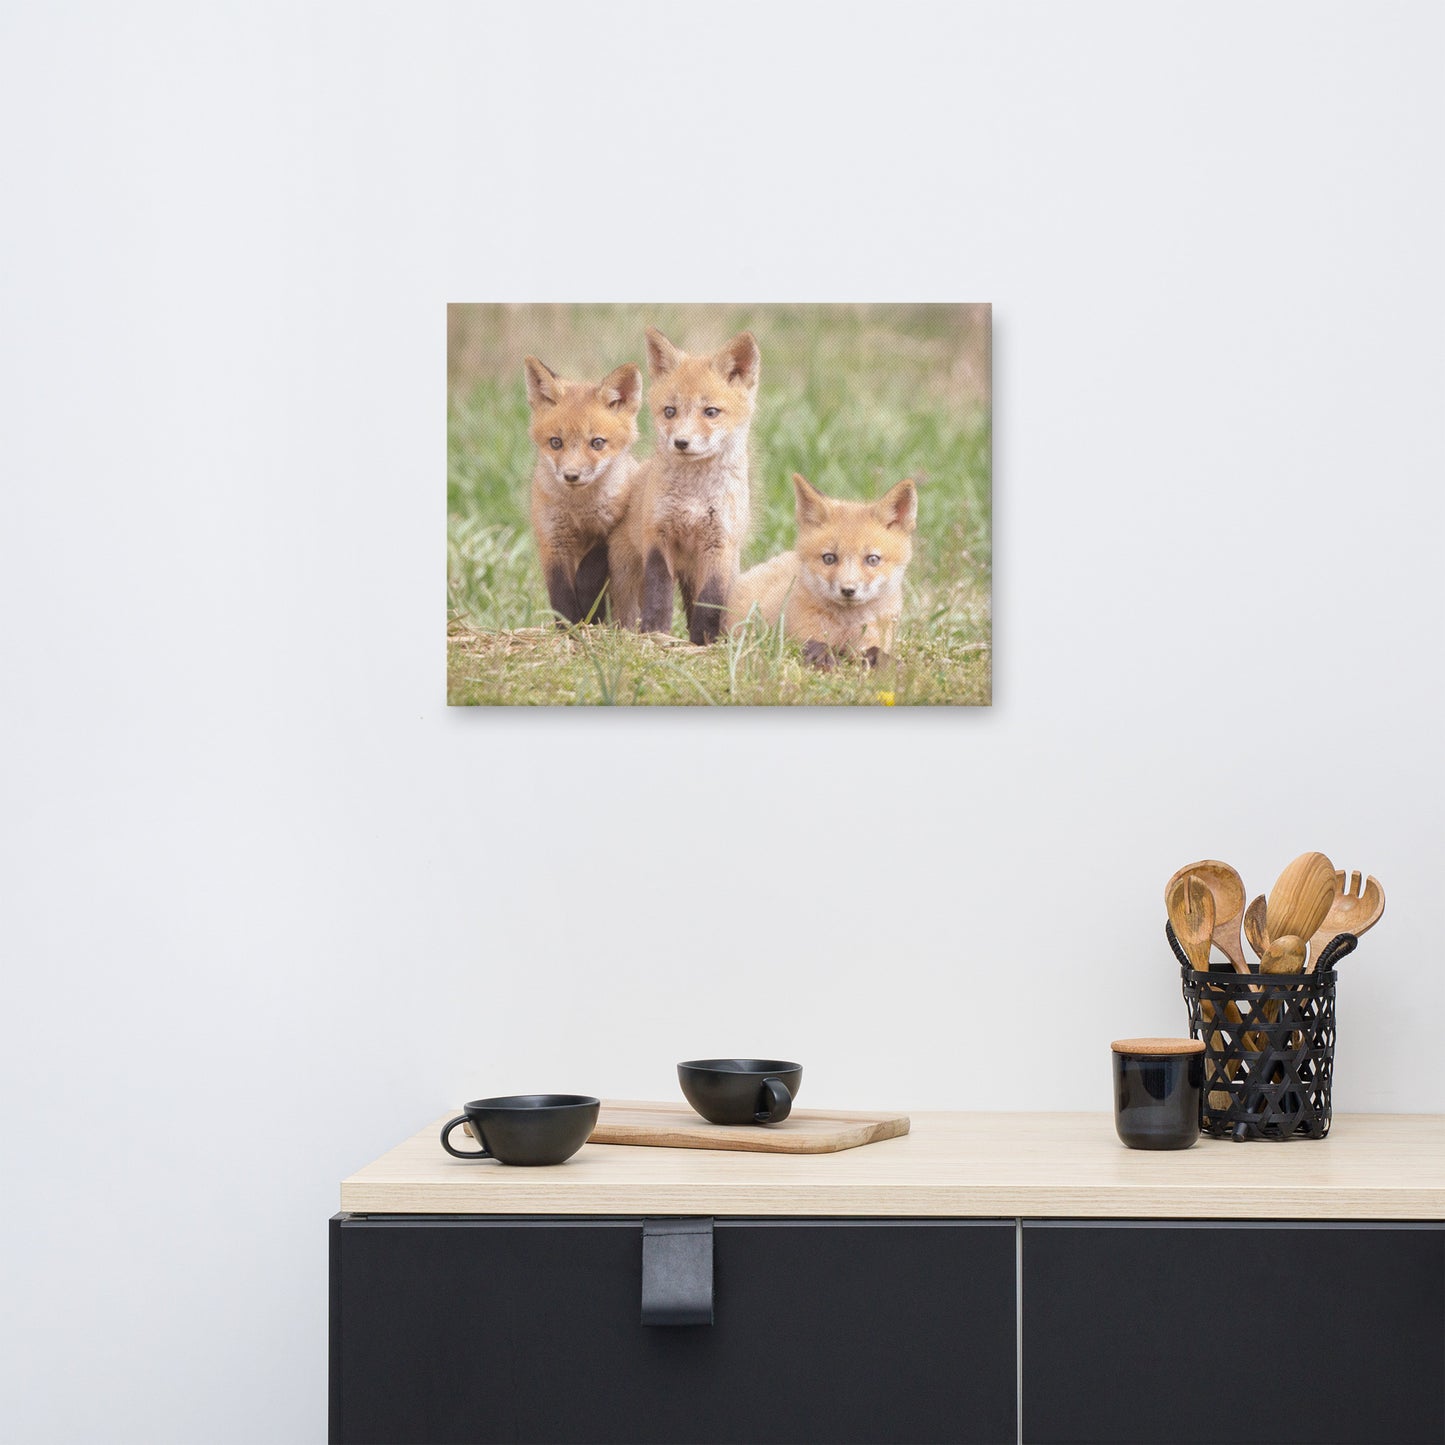 Baby Red Foxes Siblings Animal / Wildlife Photograph Canvas Wall Art Prints